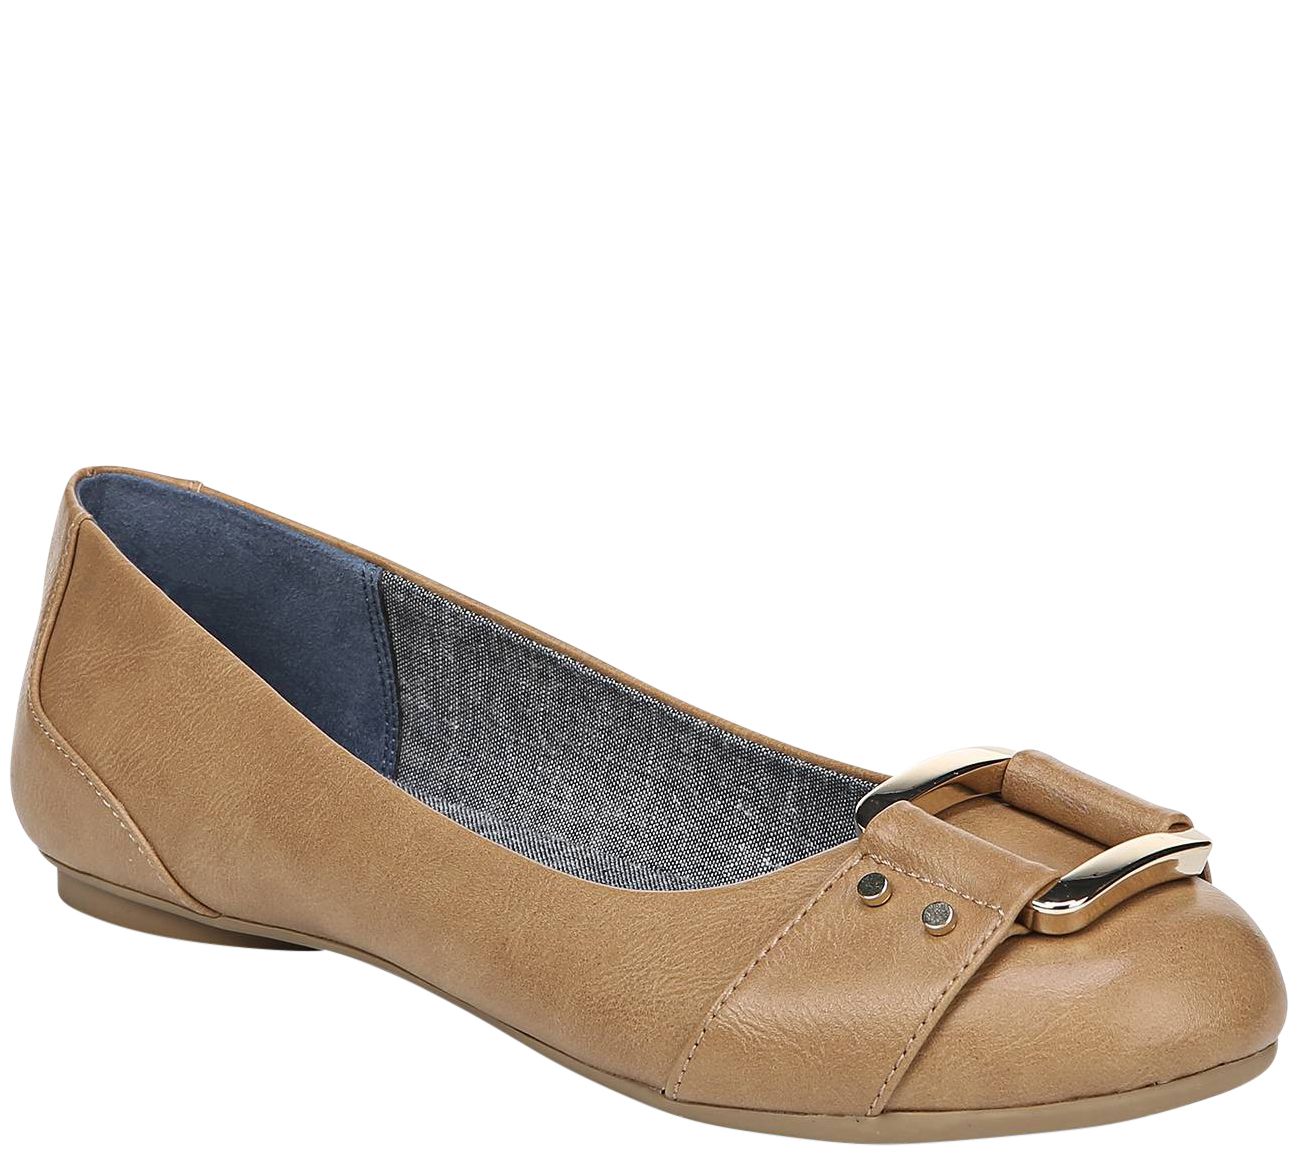 Dr. Scholl's Memory-Foam Flats with Buckle Detail - Frankie - QVC.com